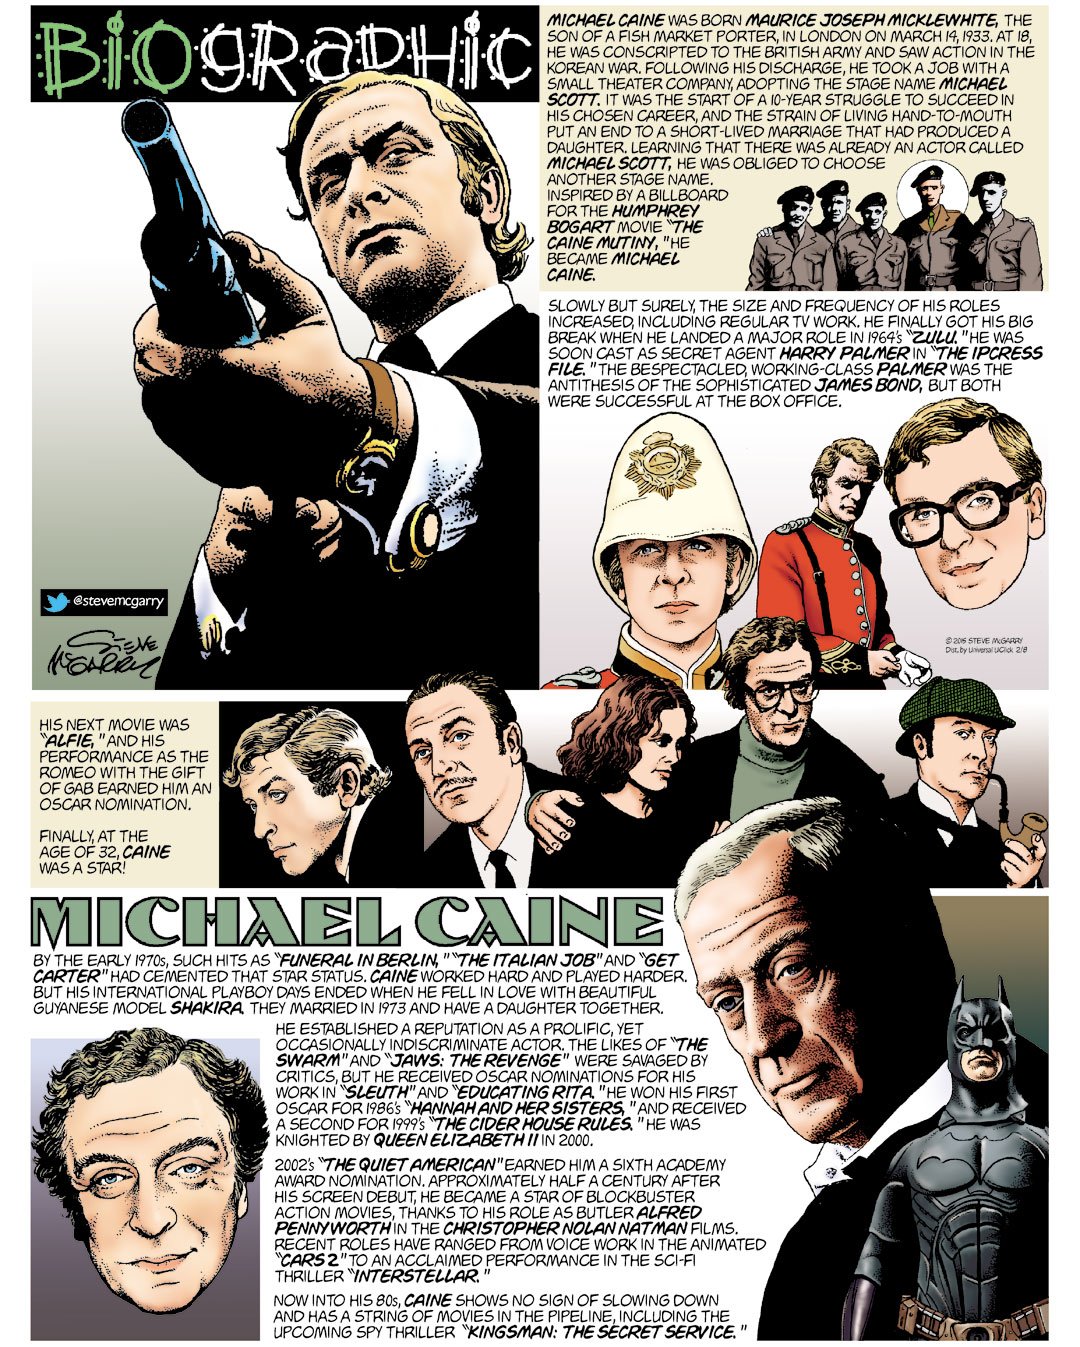 Happy 85th birthday to the great Michael Caine! Here\s his lifestory in my Biographic series back in 2015. 